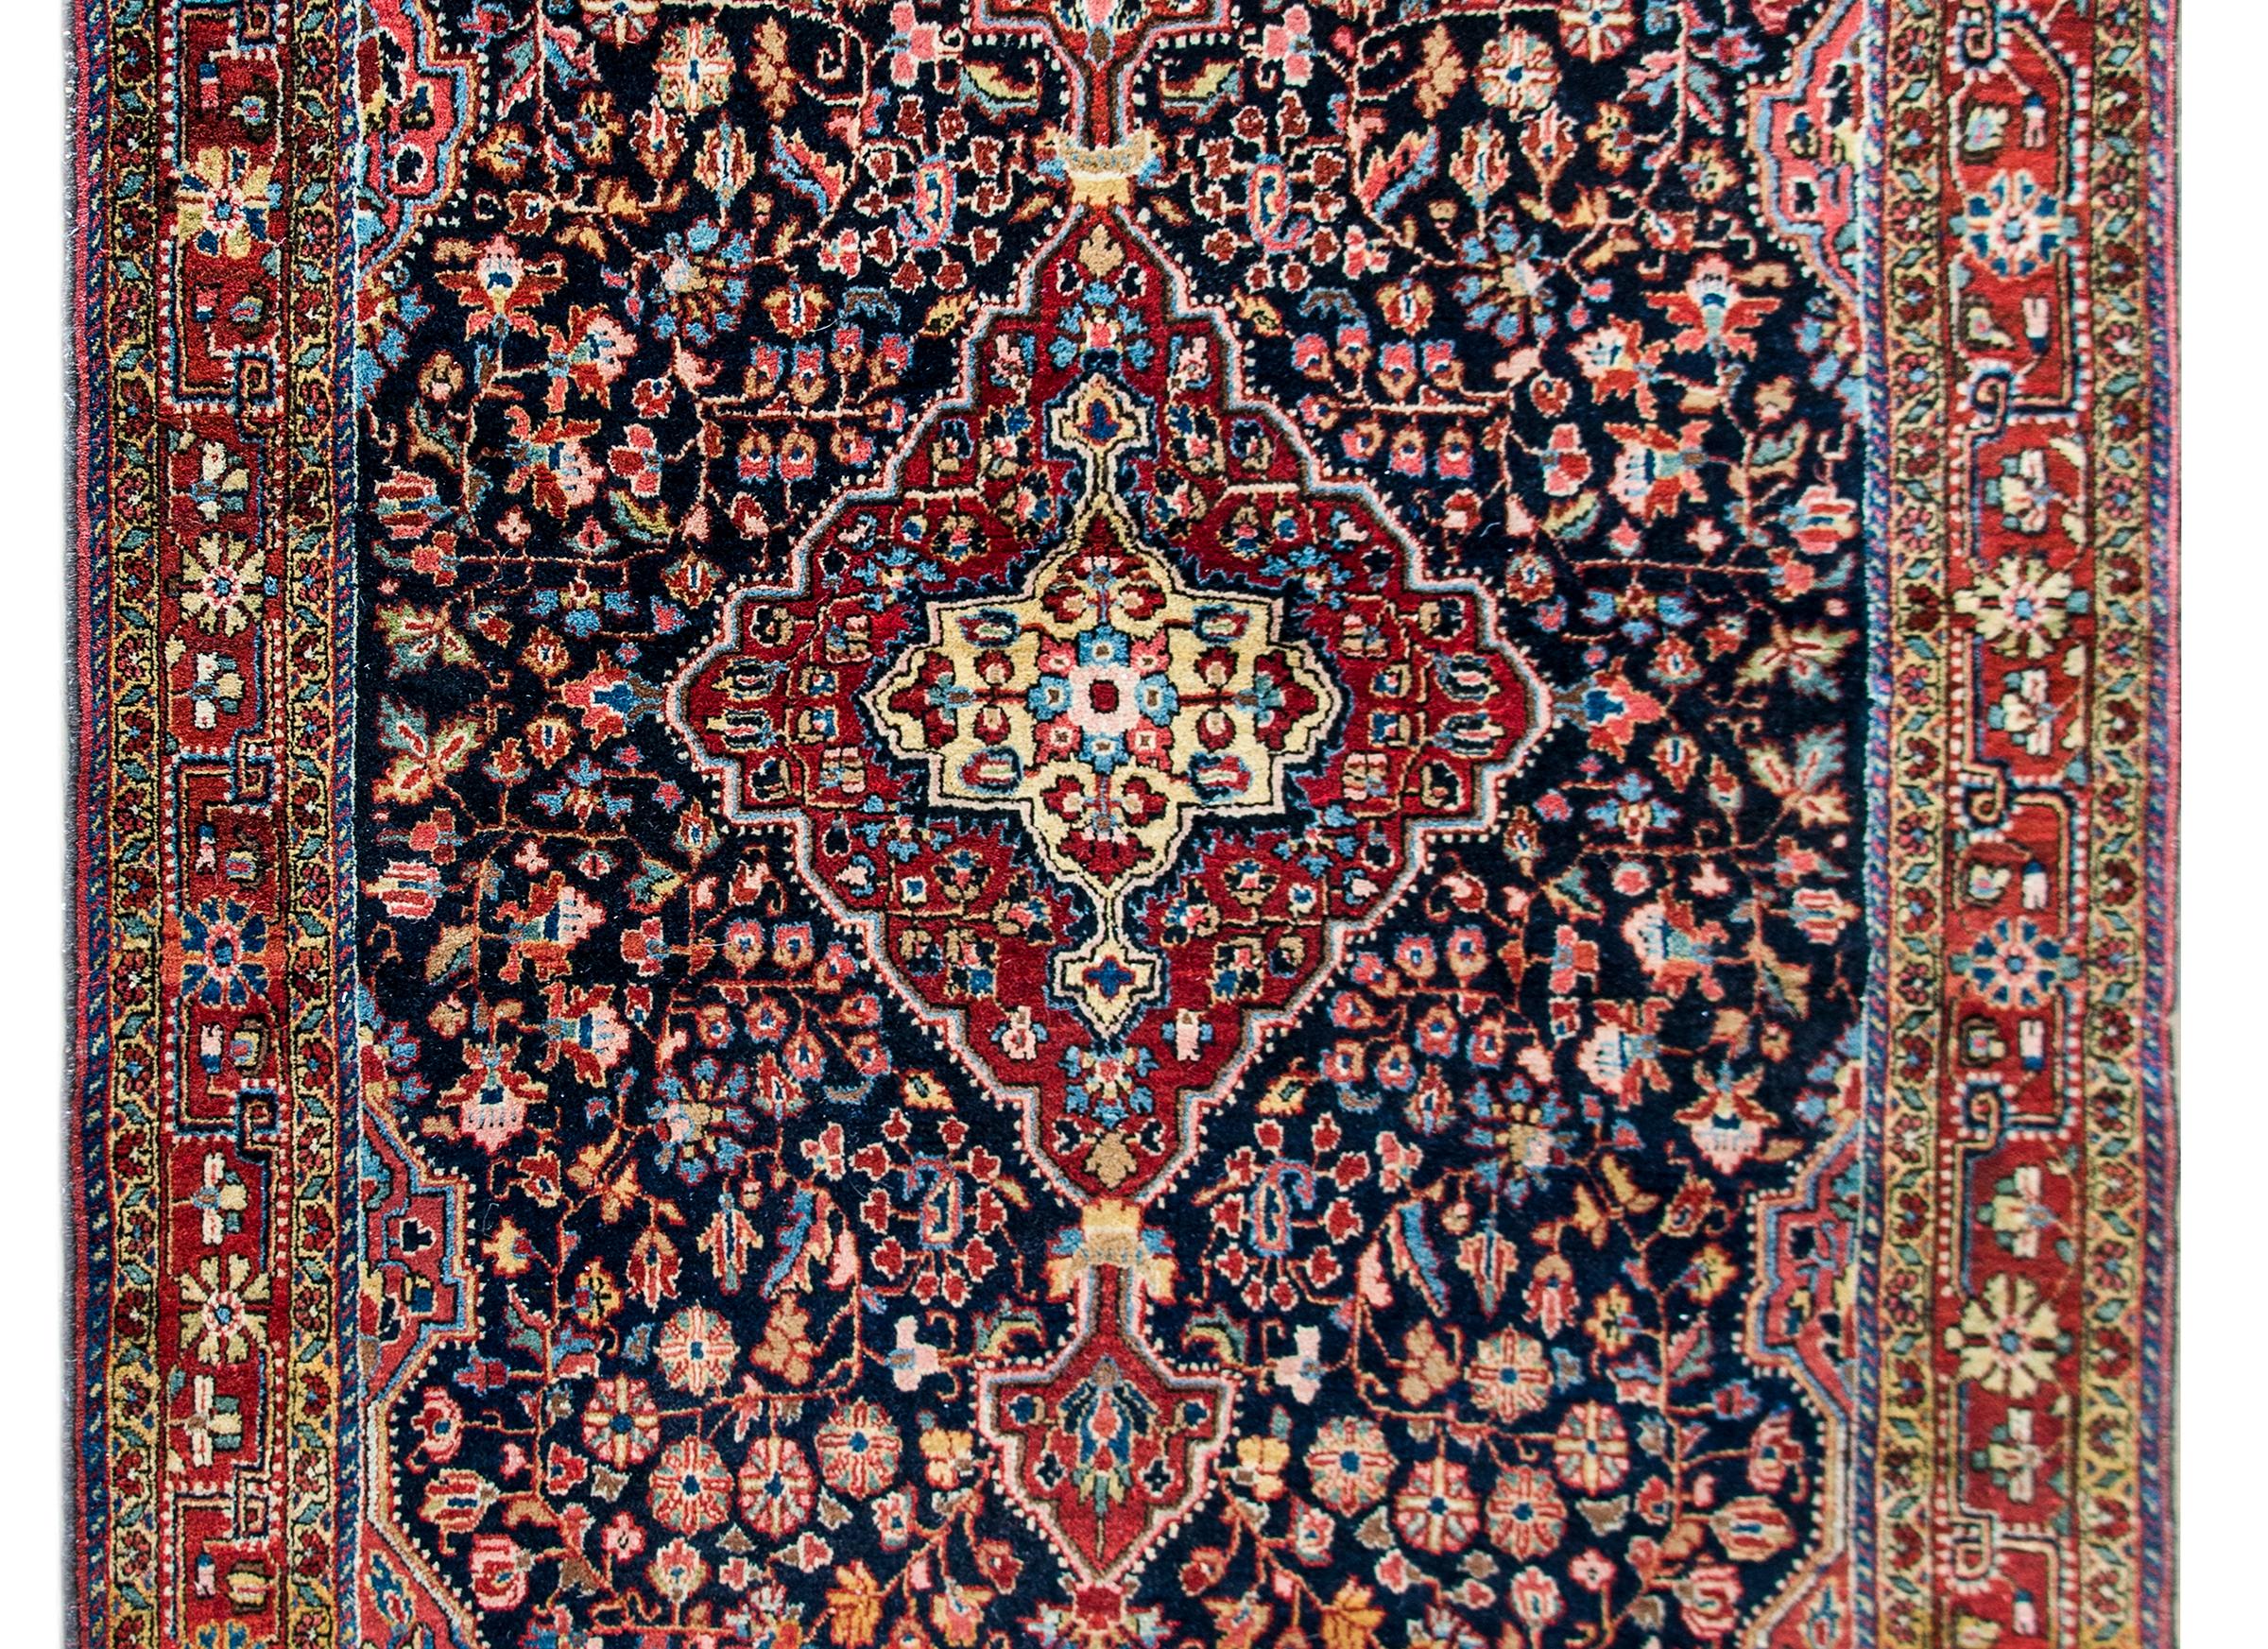 An early 20th century Persian Bidjar rug with a wonderful floral medallion living amidst a field of densely woven flowers and scrolling vines, and surrounded by a wide floral border composed of multiple thin stripes, and all woven in cranberry,